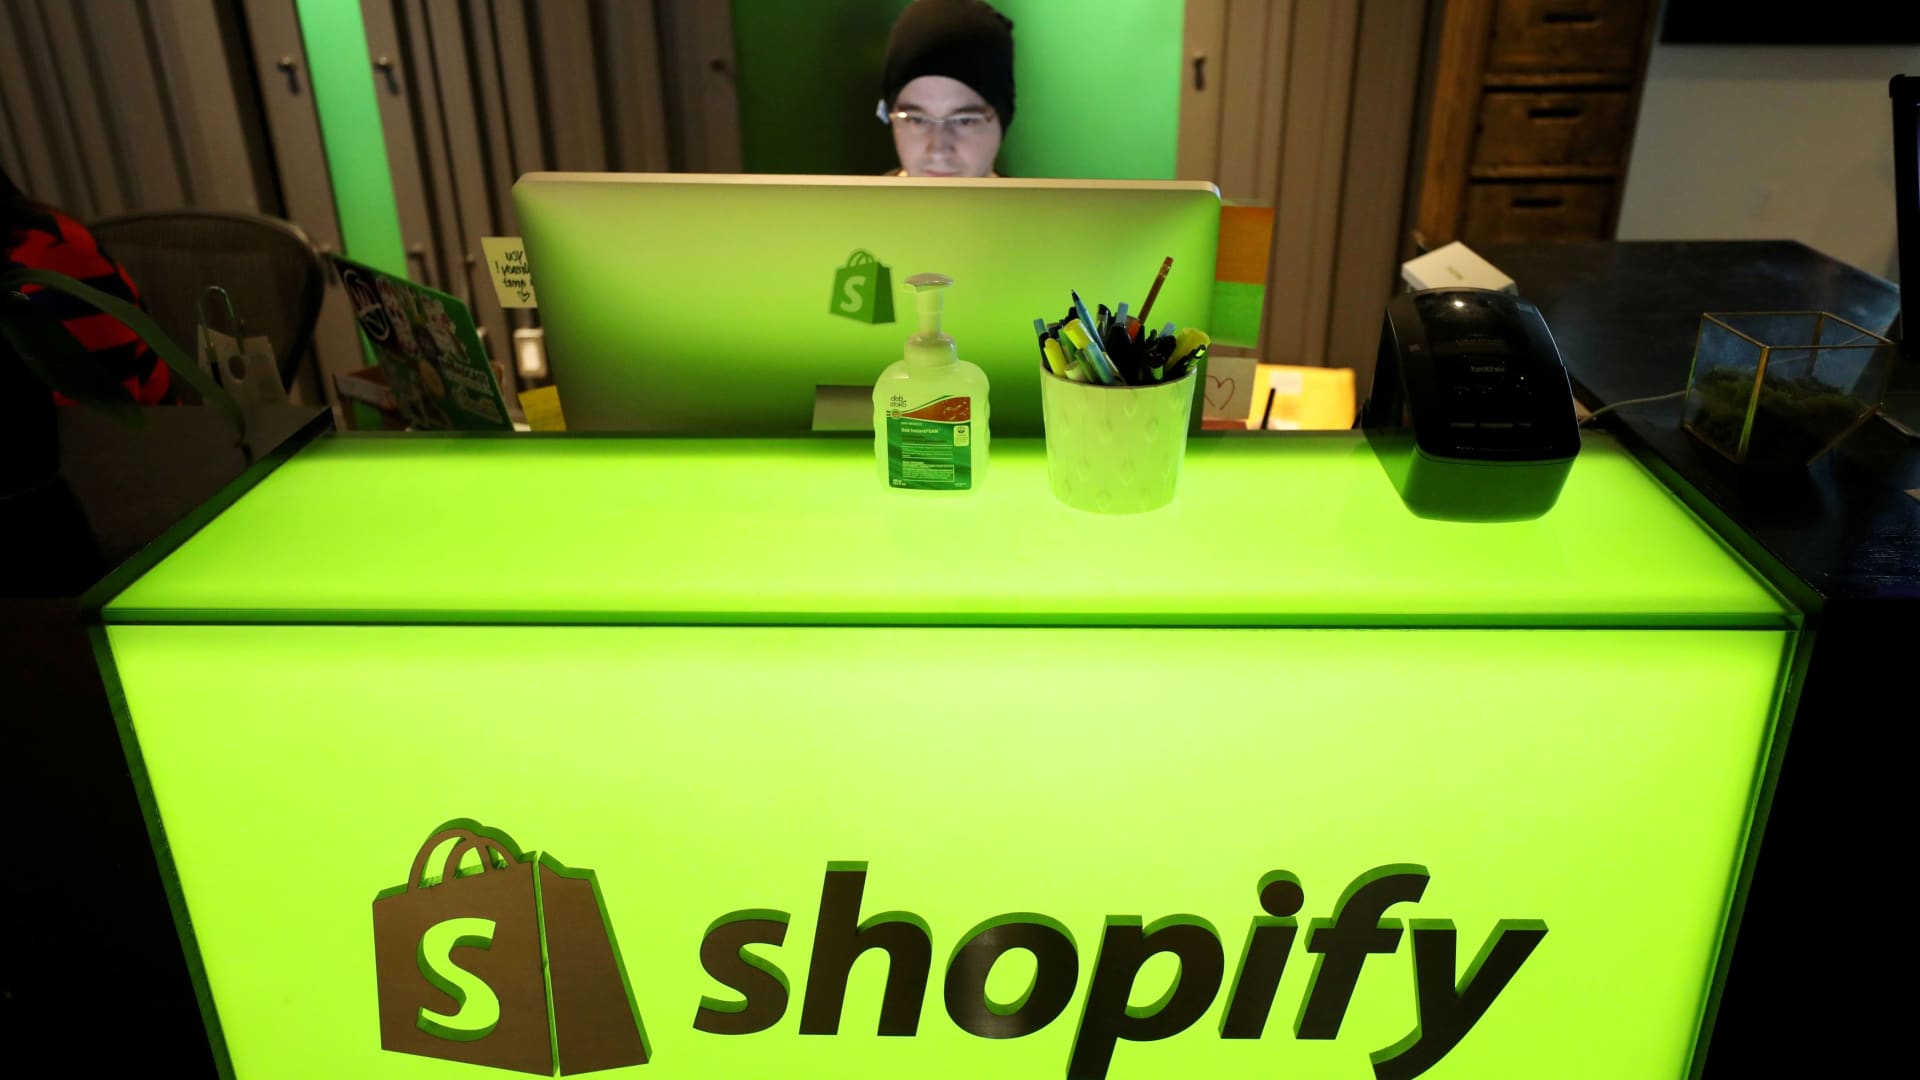 Shopify shares plunge 19% on weak guidance [Video]